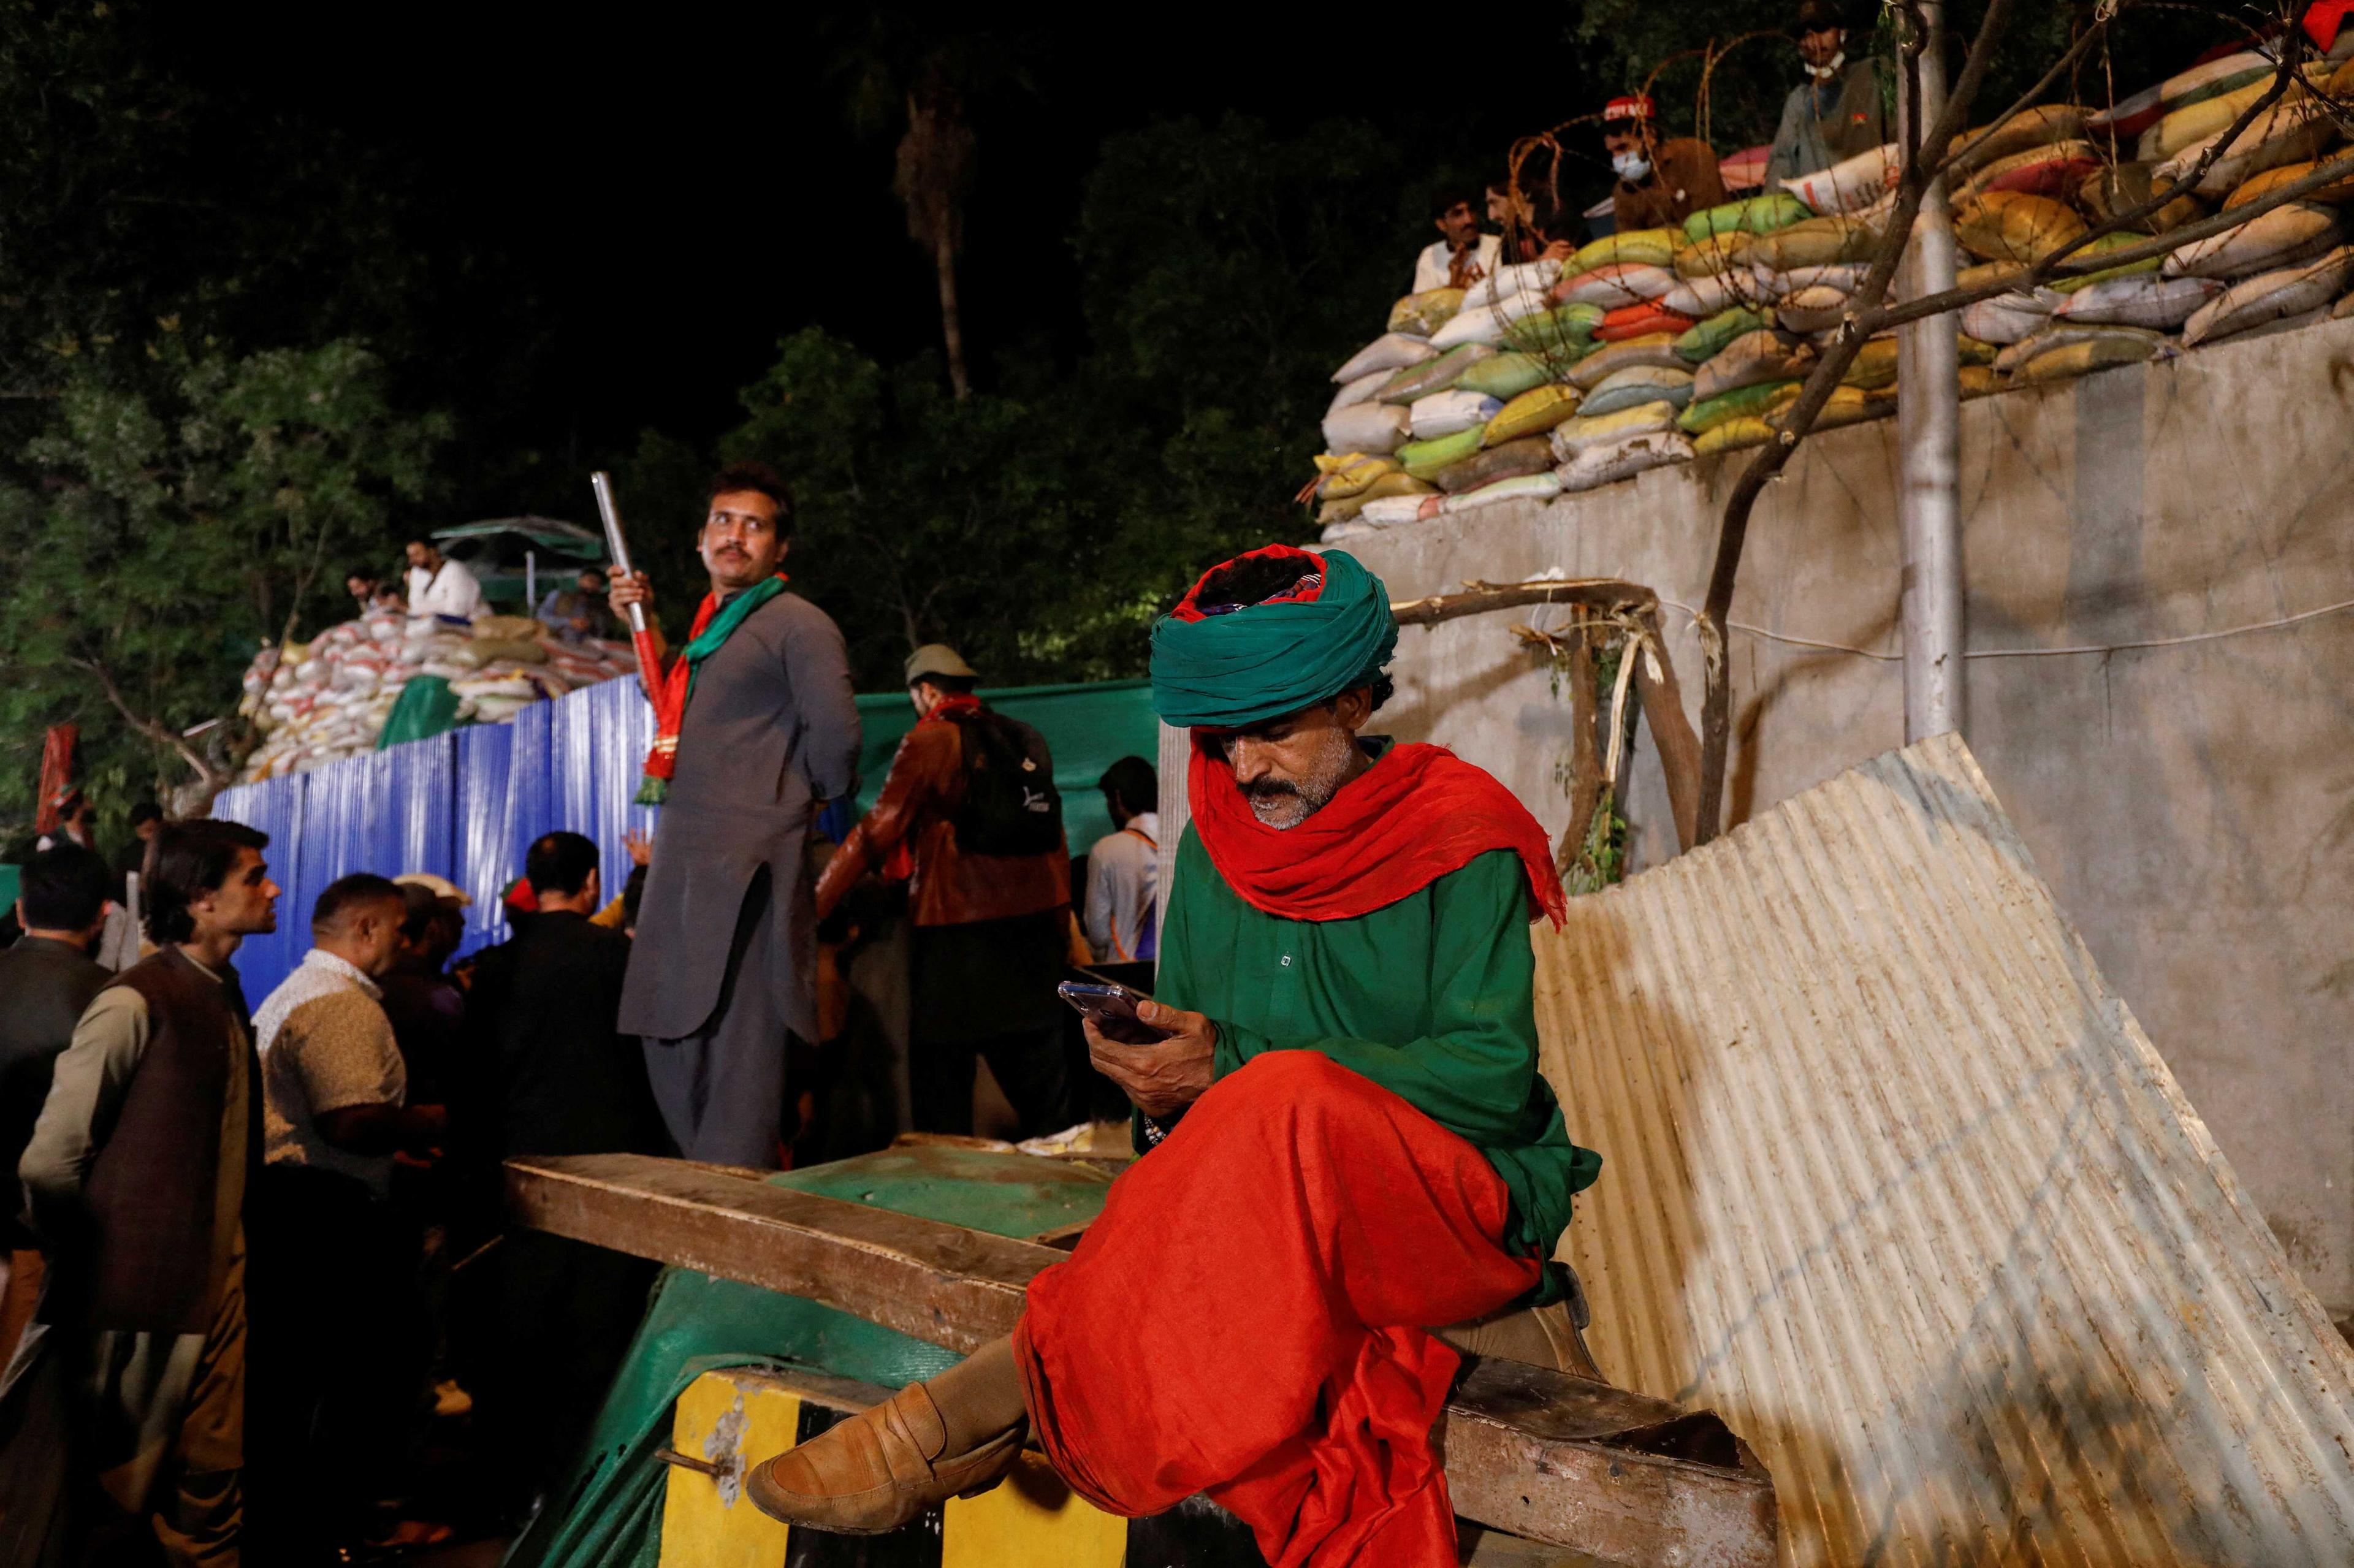 A supporter of former Pakistani Prime Minister Imran Khan sits outside the entrance of Khan's house, wearing attires with the colours of the party's flag, days after clashing with police, in Lahore, Pakistan March 20. Photo: Reuters